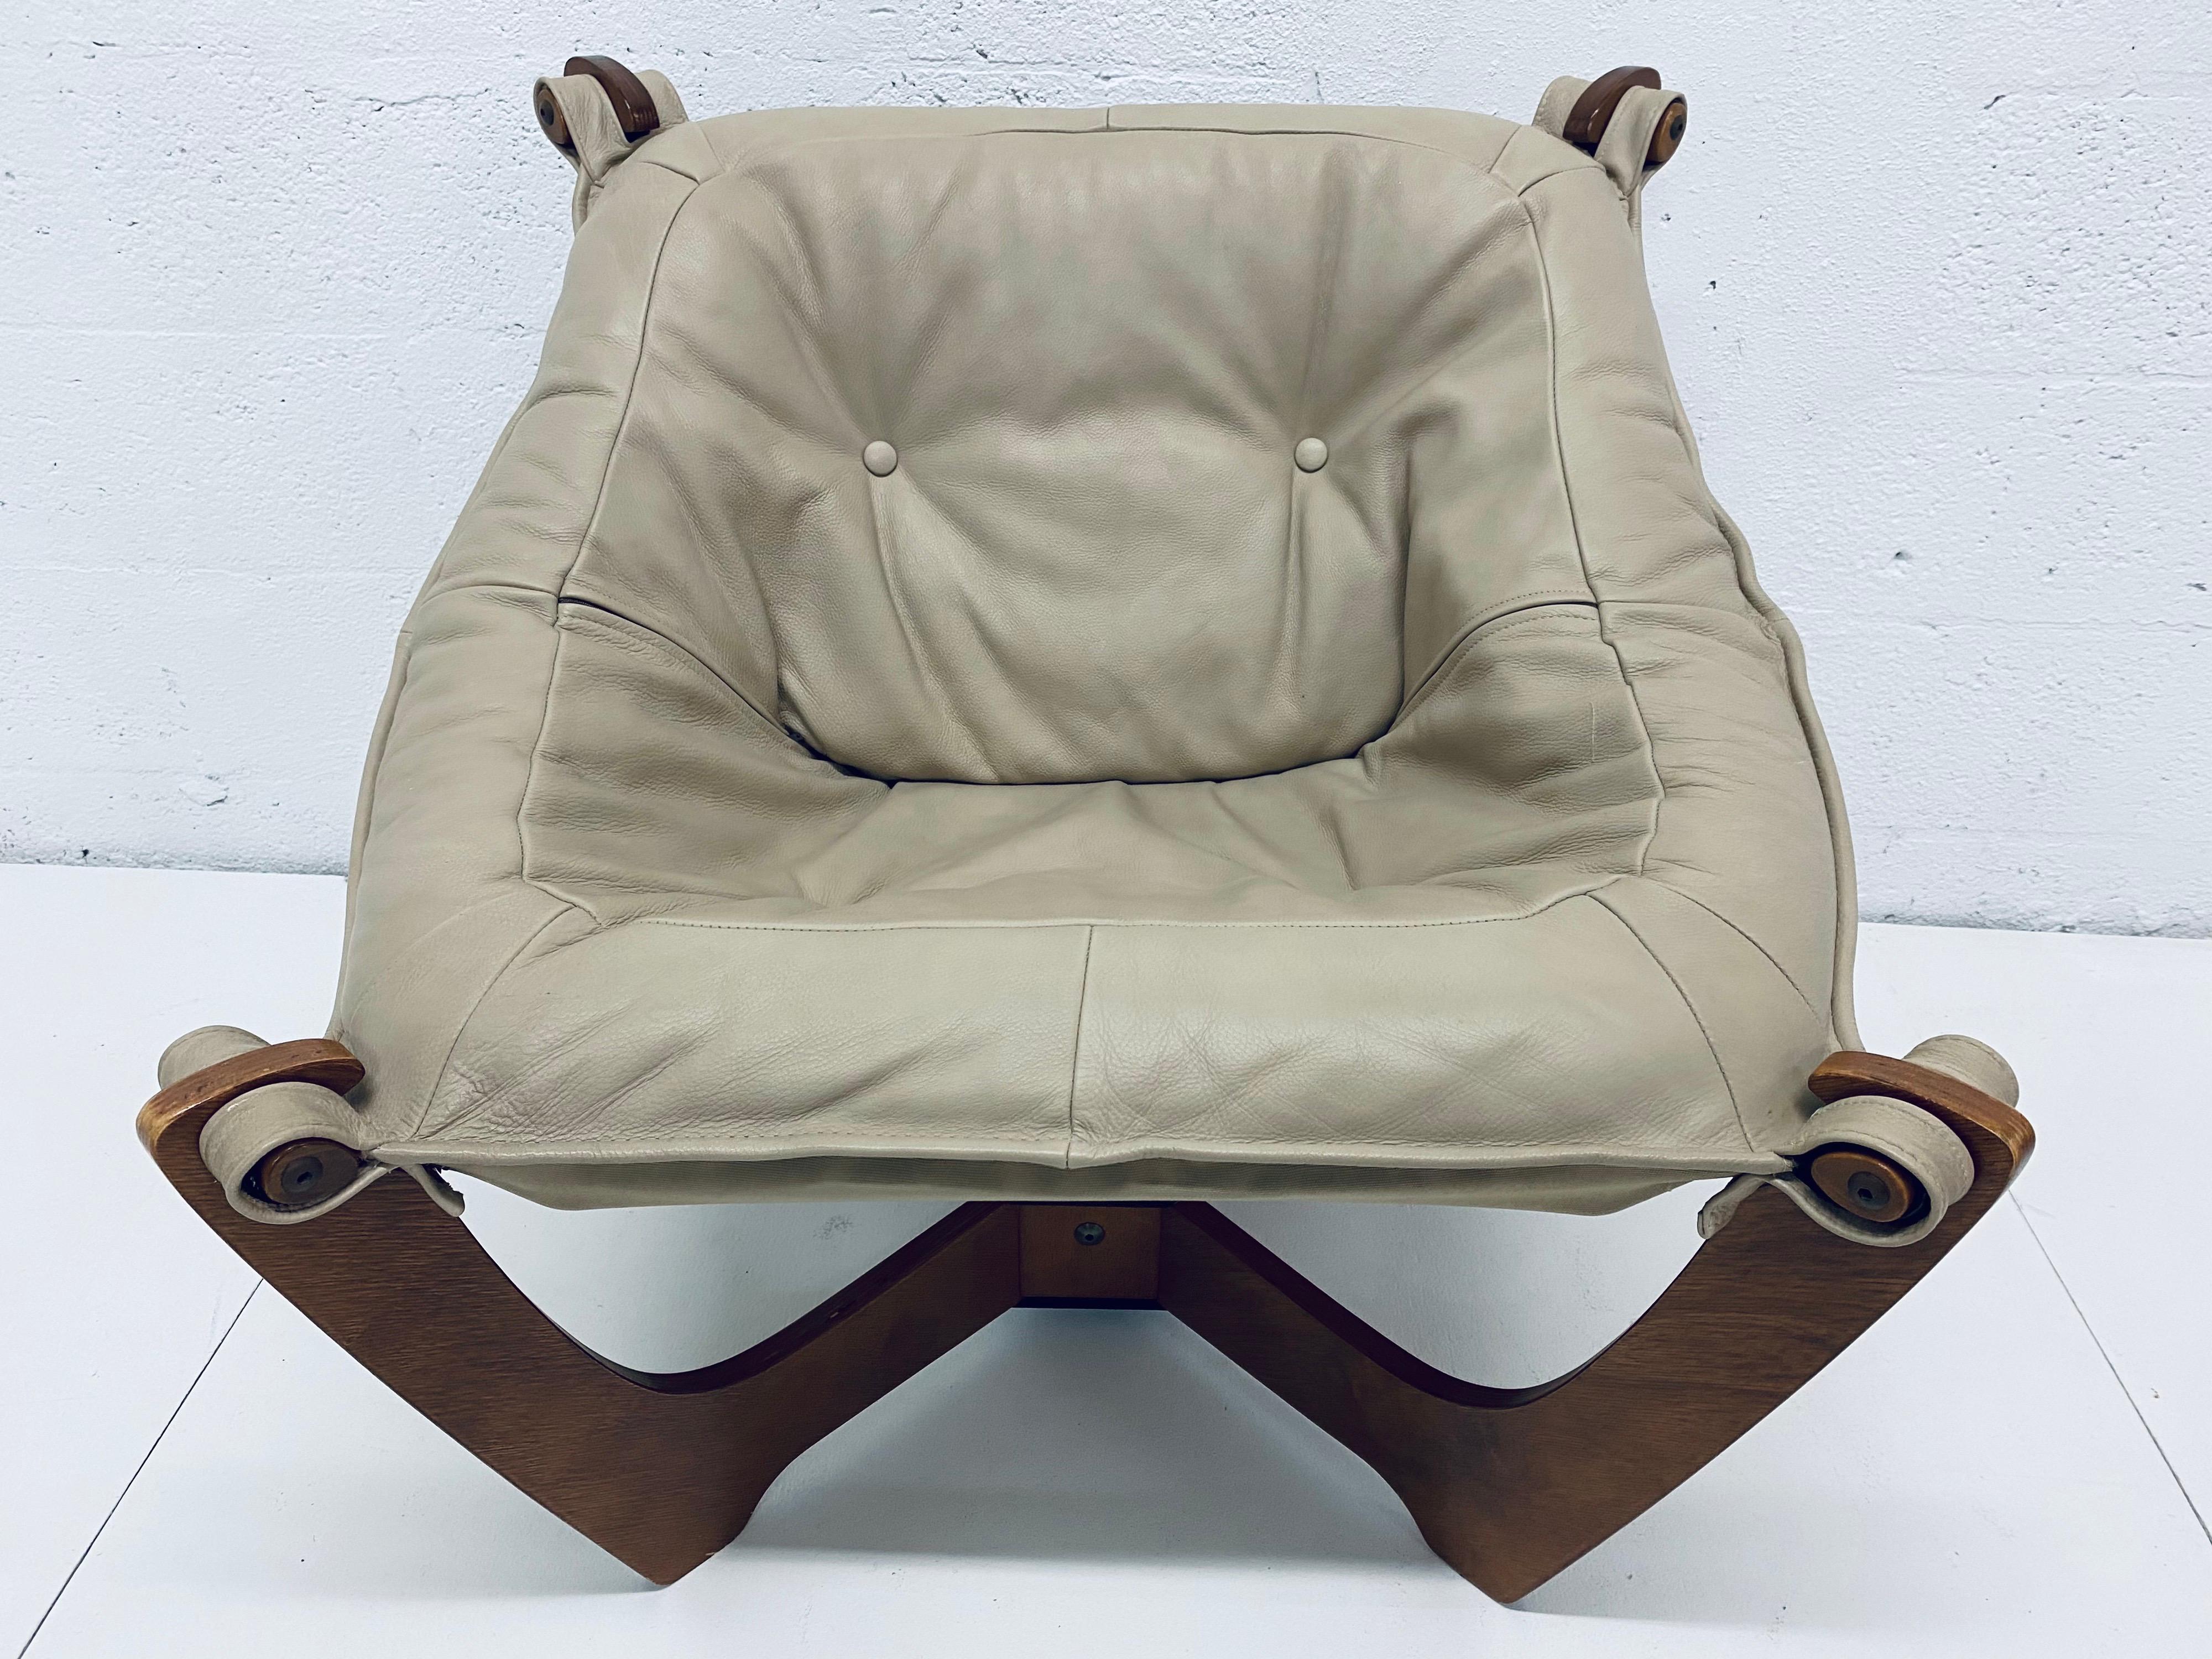 Tan leather sling seat suspended from a dark stained wood frame by Odd Knutsen for Hjellegjerde.